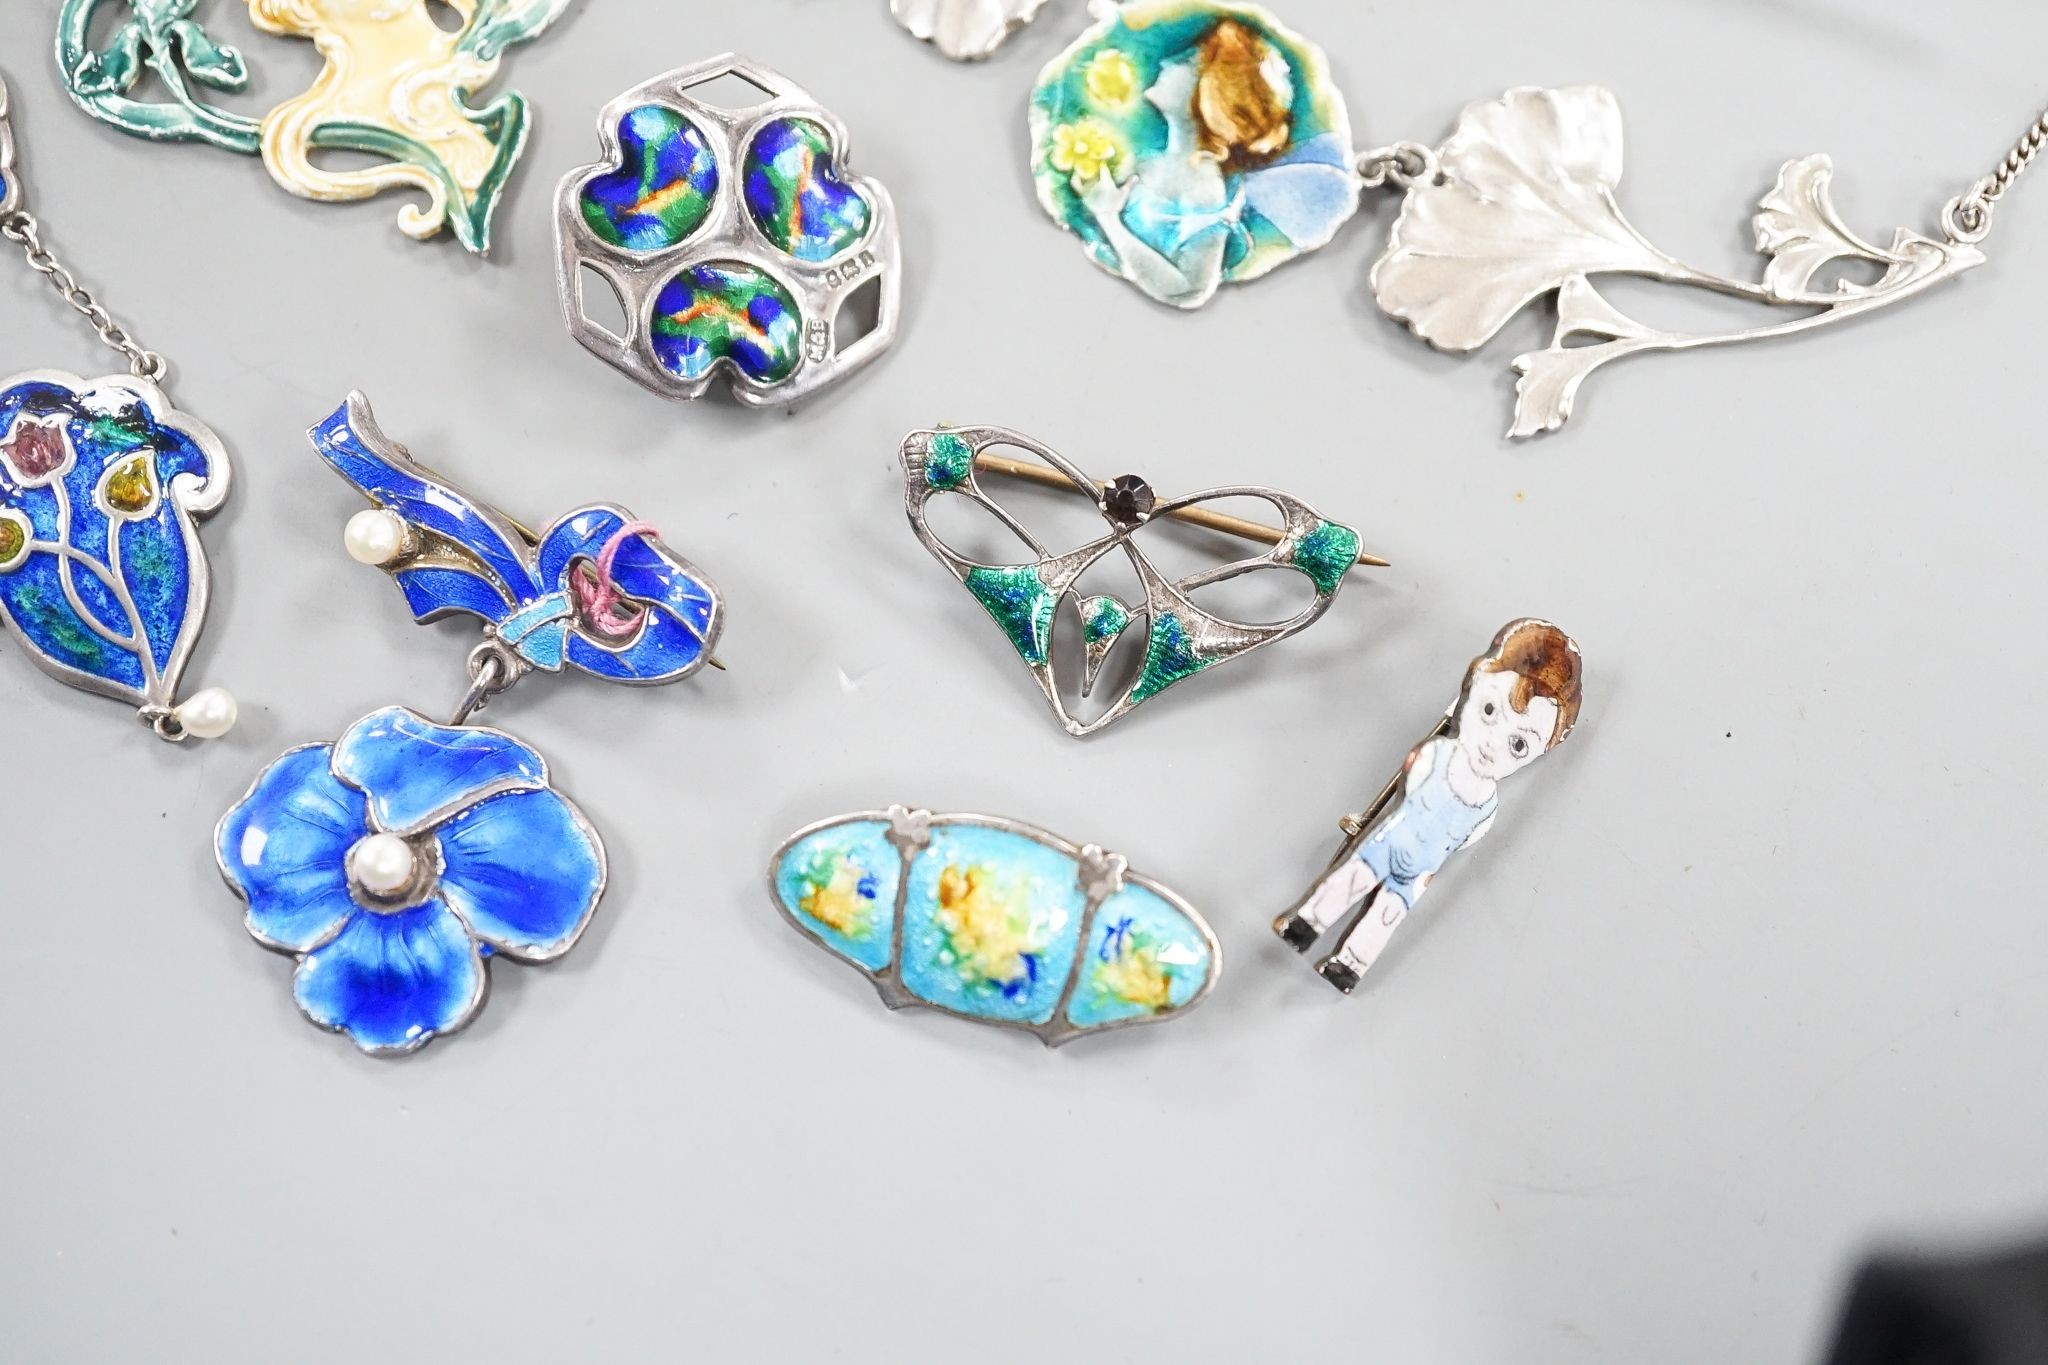 A small collection of early to mid 20th century silver or white metal and enamel jewellery, including brooch by Charles Horner and brooch by Marples & Beasley.